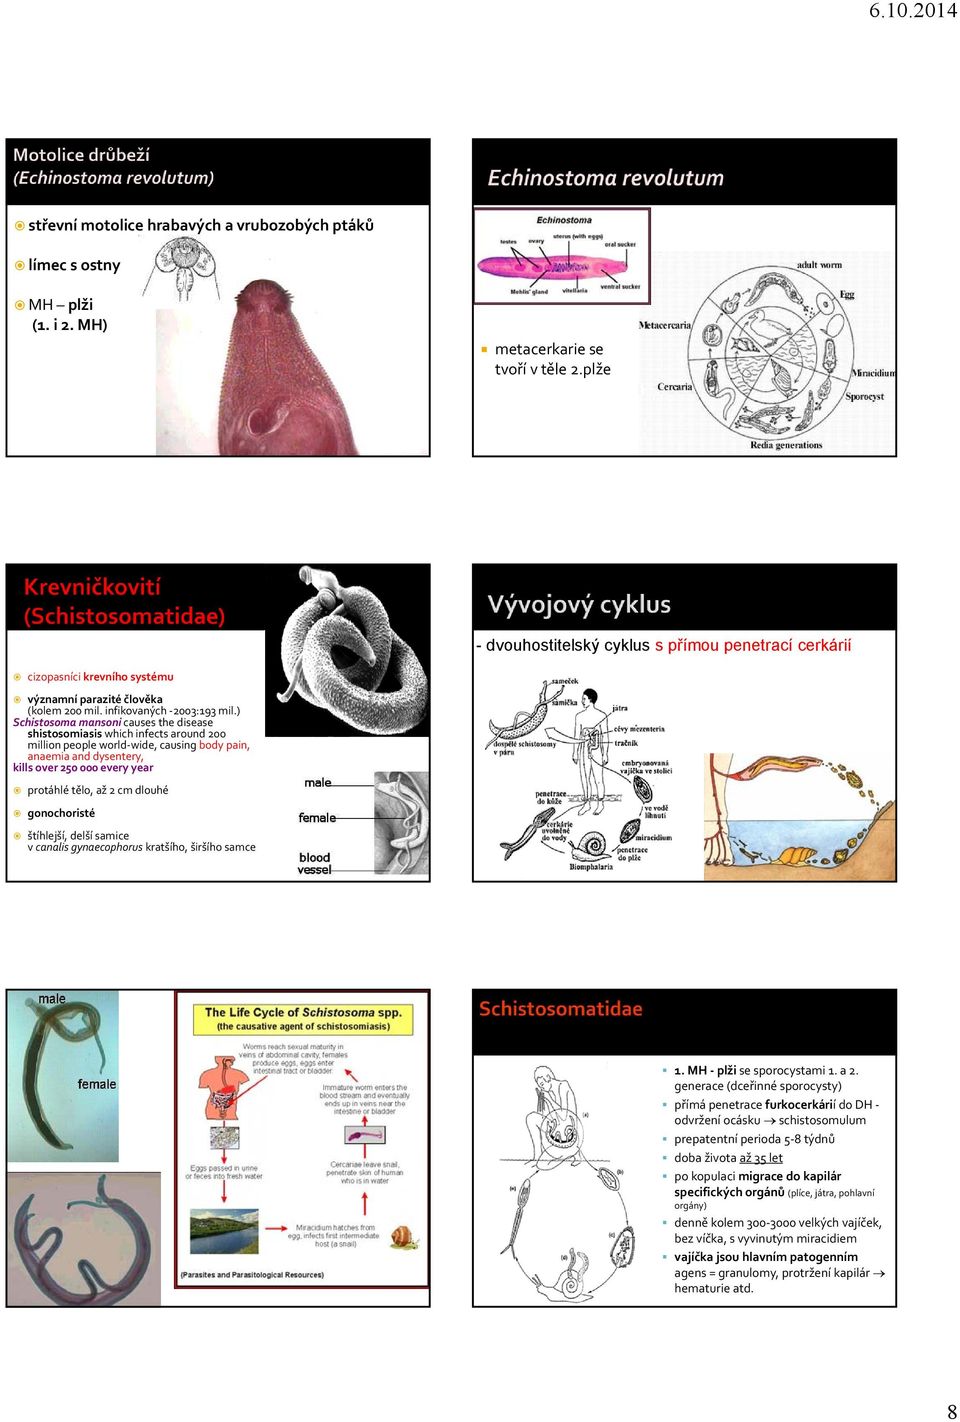 ) Schistosoma mansoni causes the disease shistosomiasis which infects around 200 million people world wide, causing body pain, anaemia and dysentery, kills over 250 000 every year protáhlé tělo, až 2